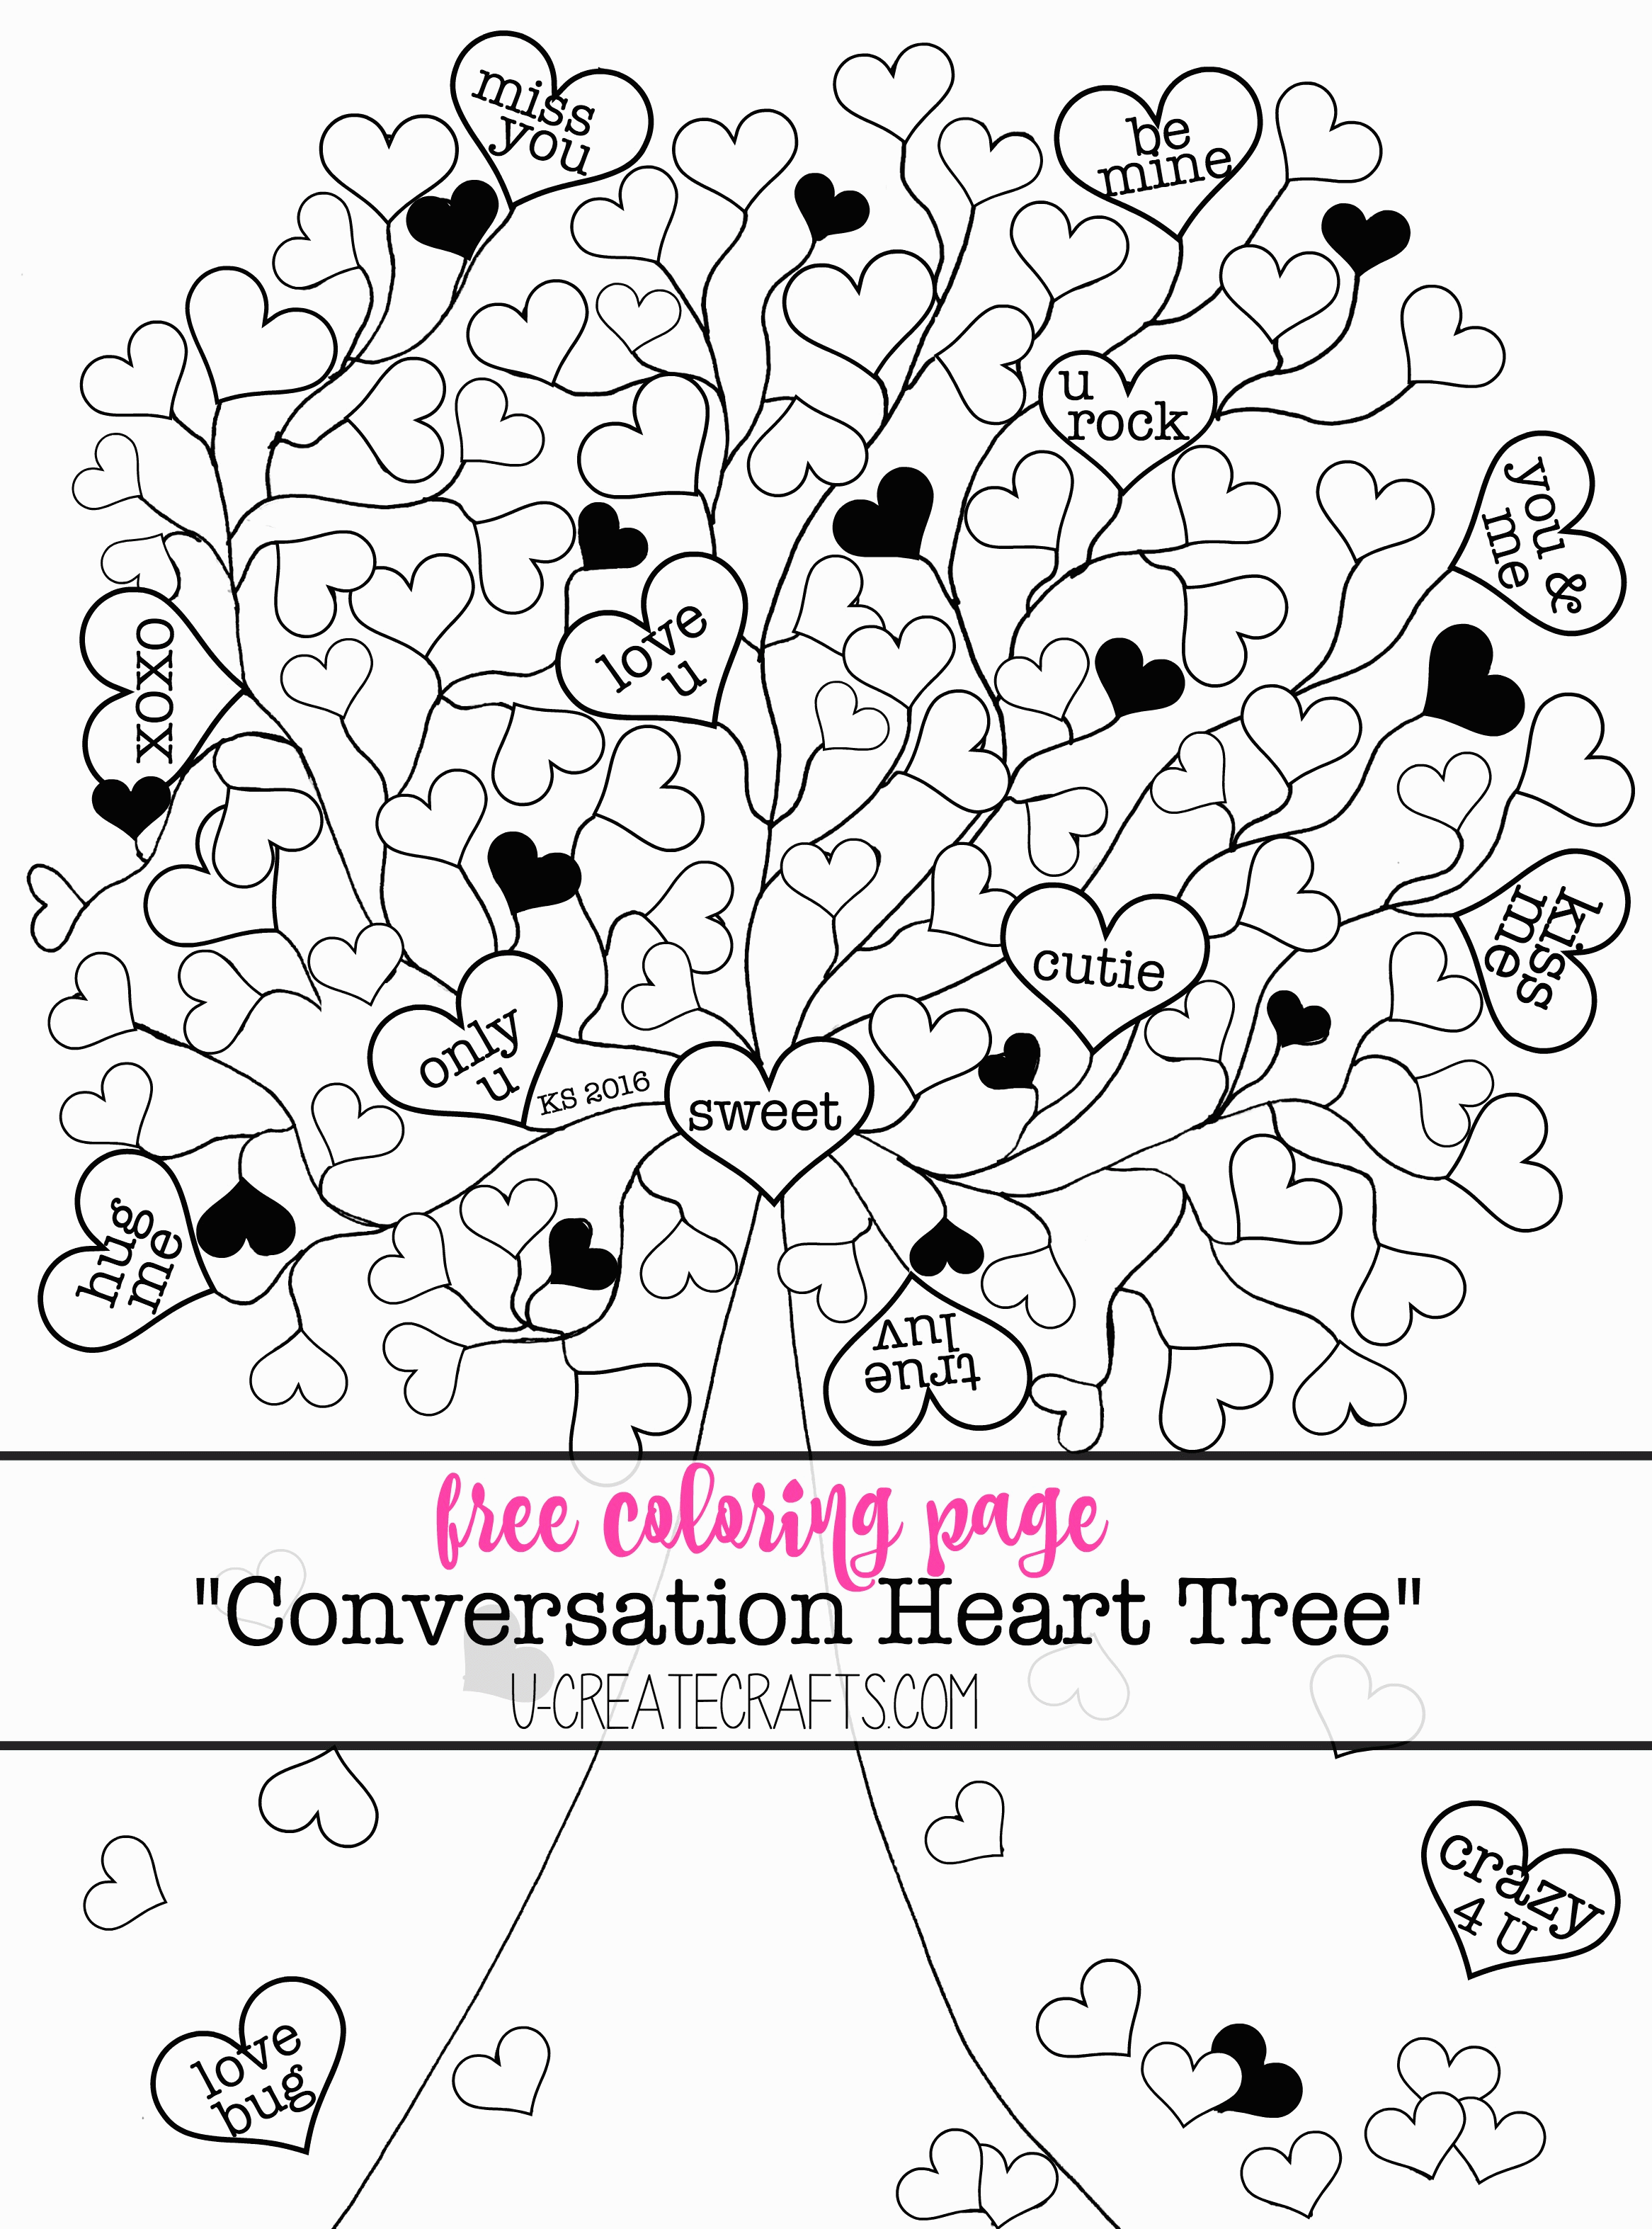 Valentine Conversation Heart Tree Coloring Pages | U Create ...